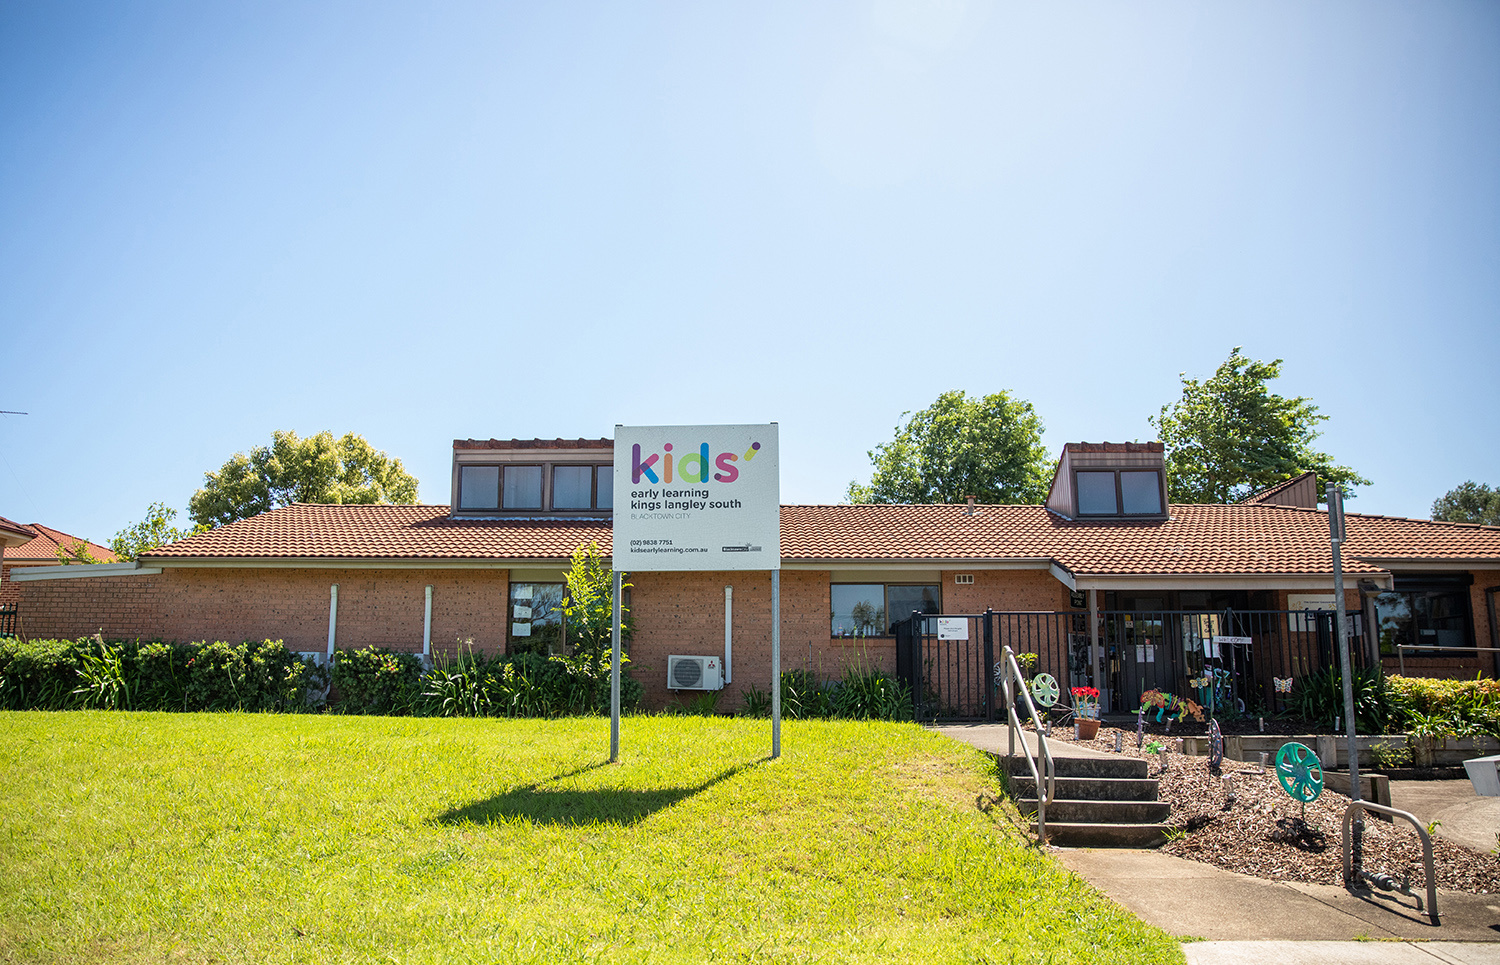 Kids' Early Learning Blacktown City Kings Langley South